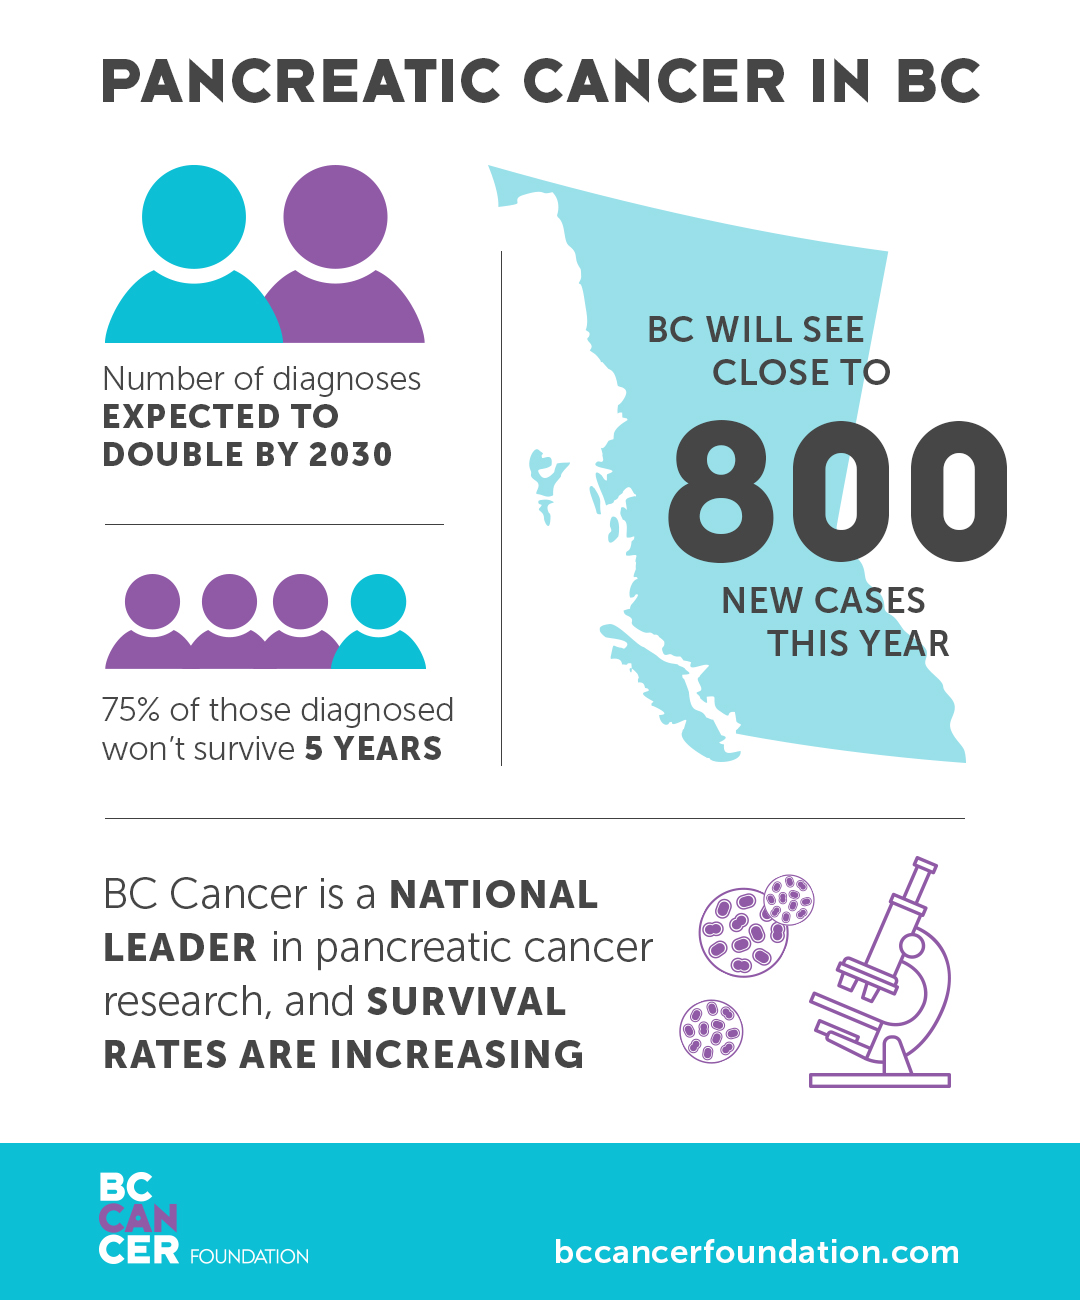 BC Cancer is a national leader in pancreatic cancer research